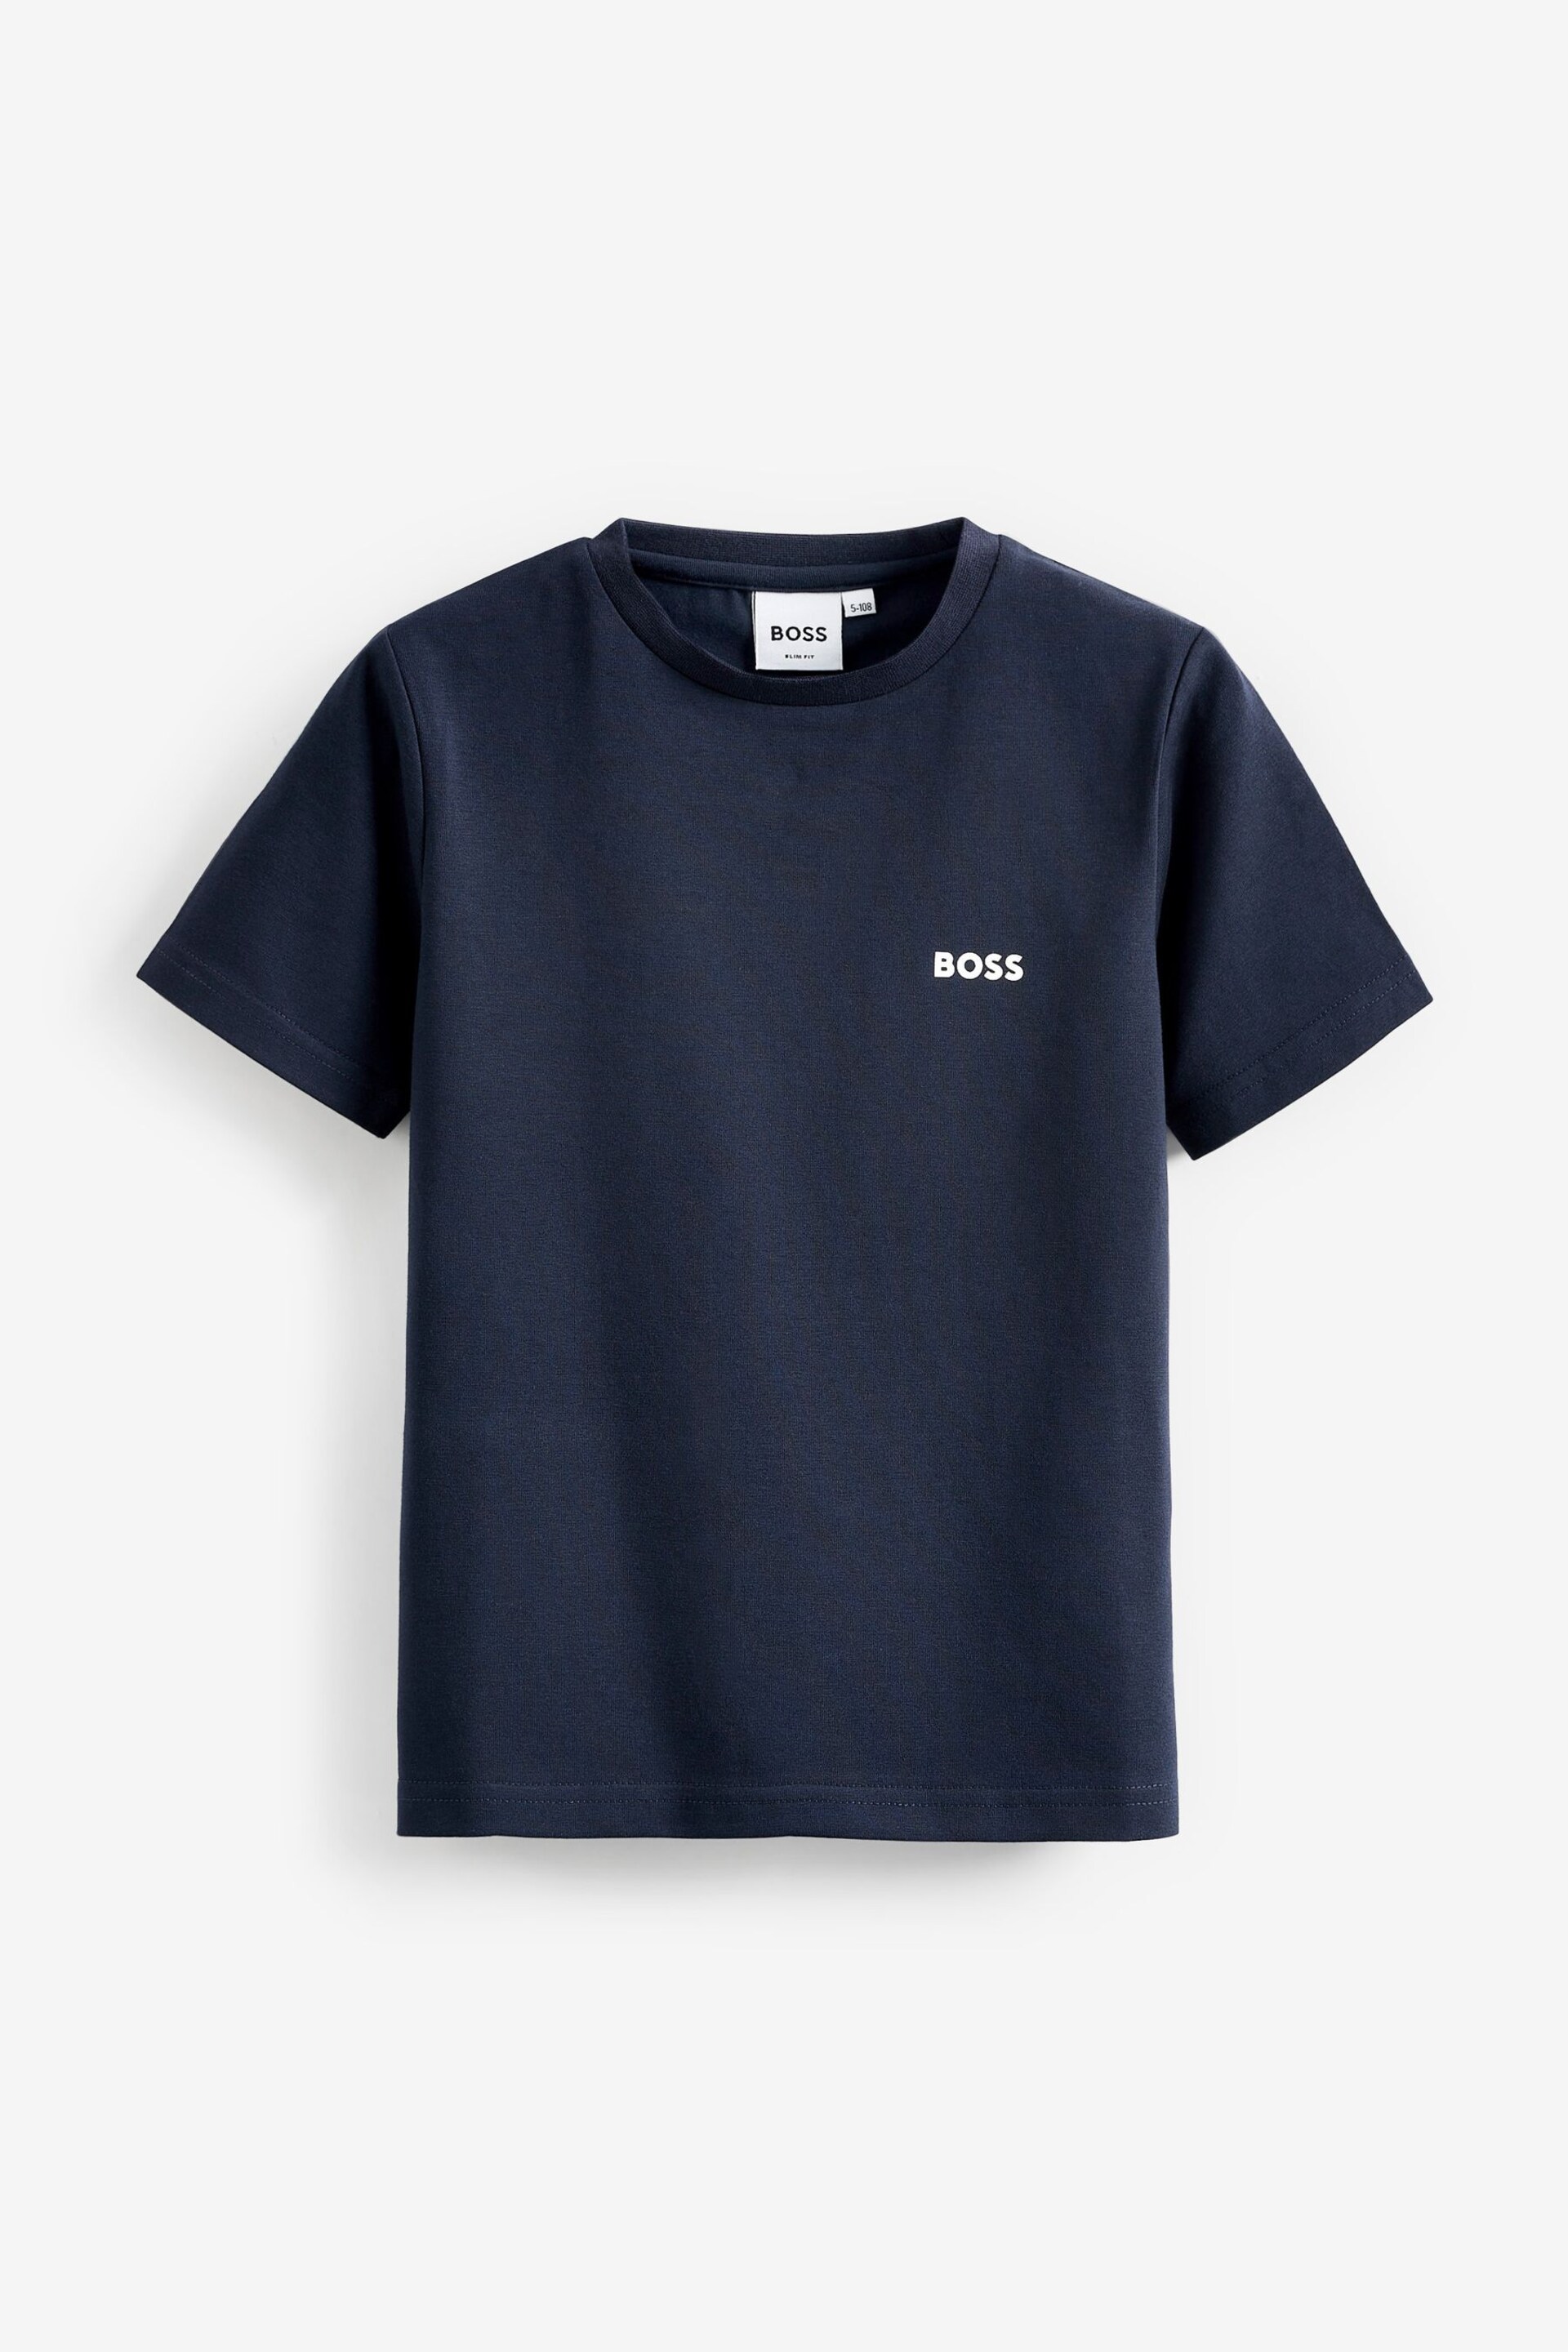 BOSS Navy Blue and White Logo T-Shirts Two Pack - Image 3 of 3